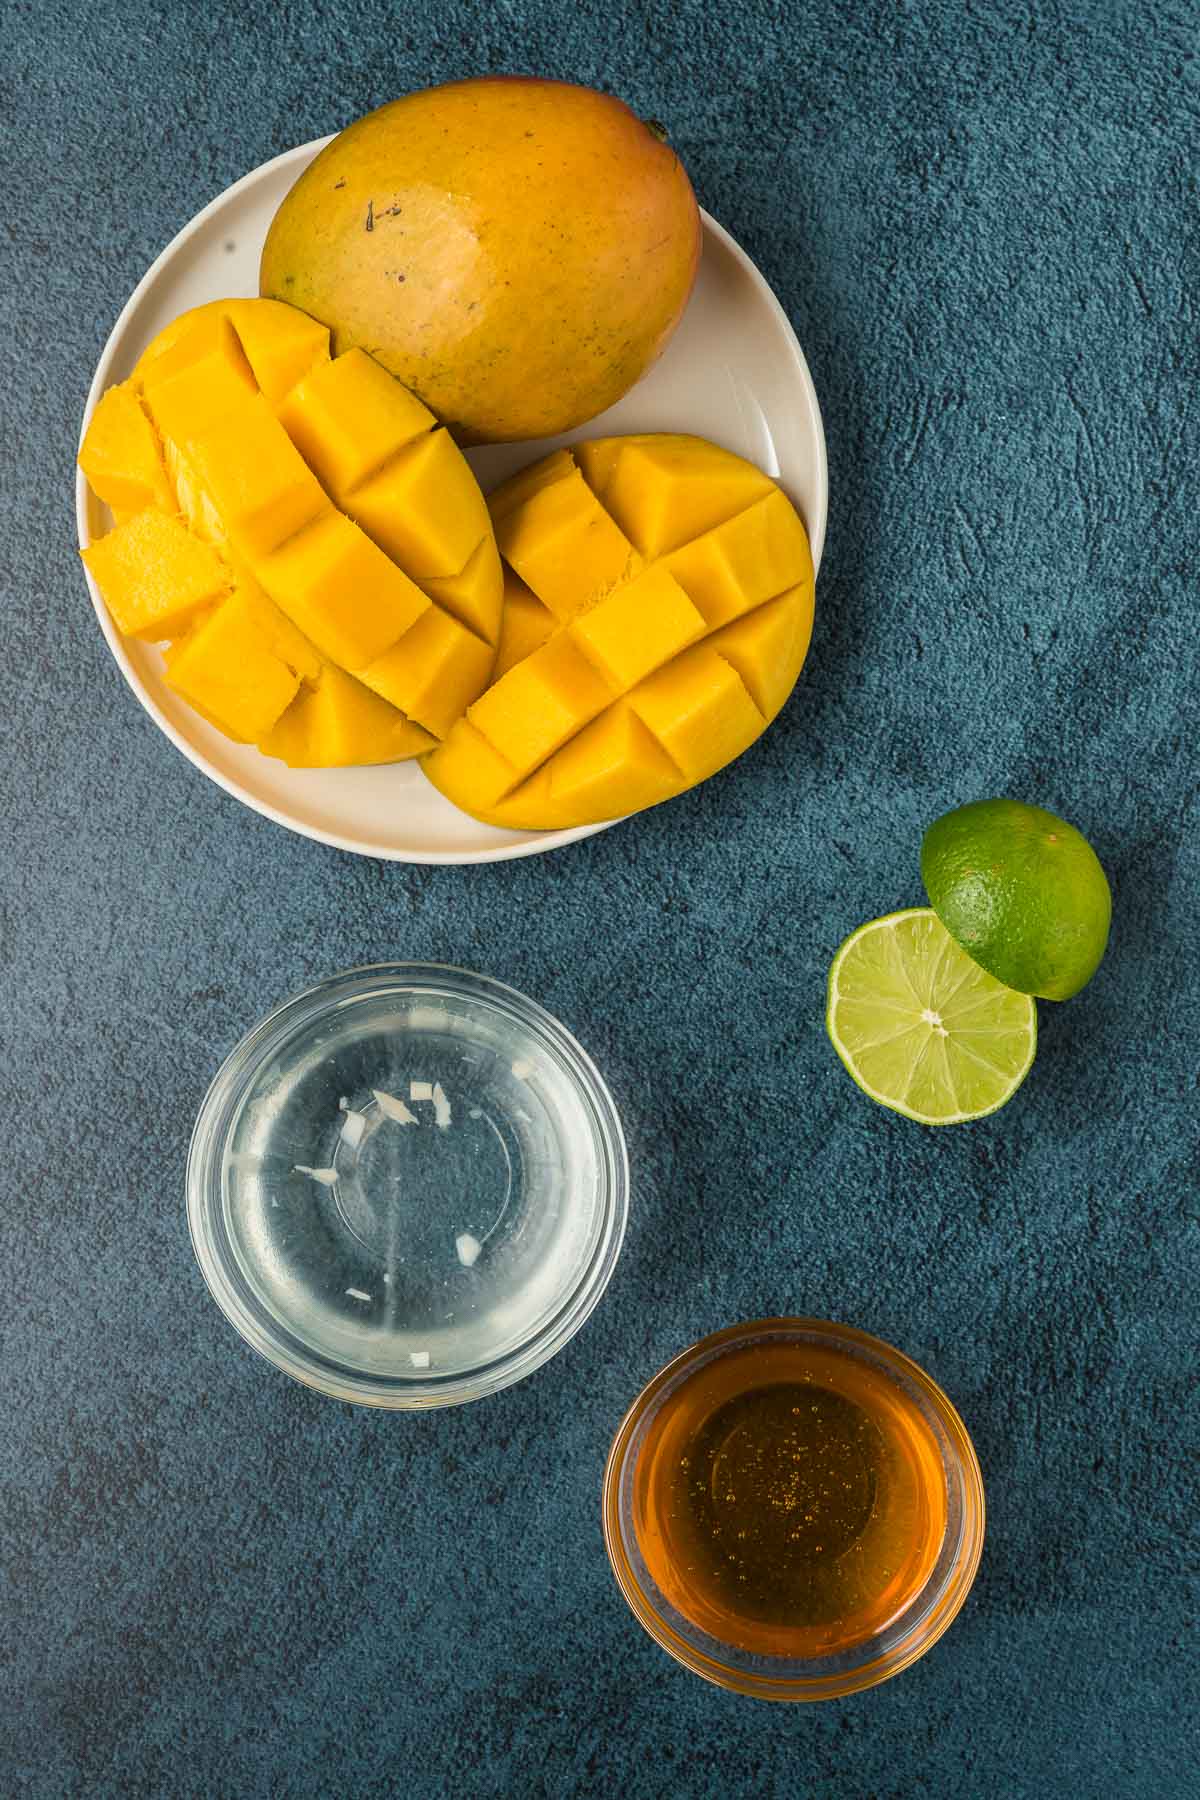 Mango popsicle ingredients including cut up mango, honey, coconut water and lime